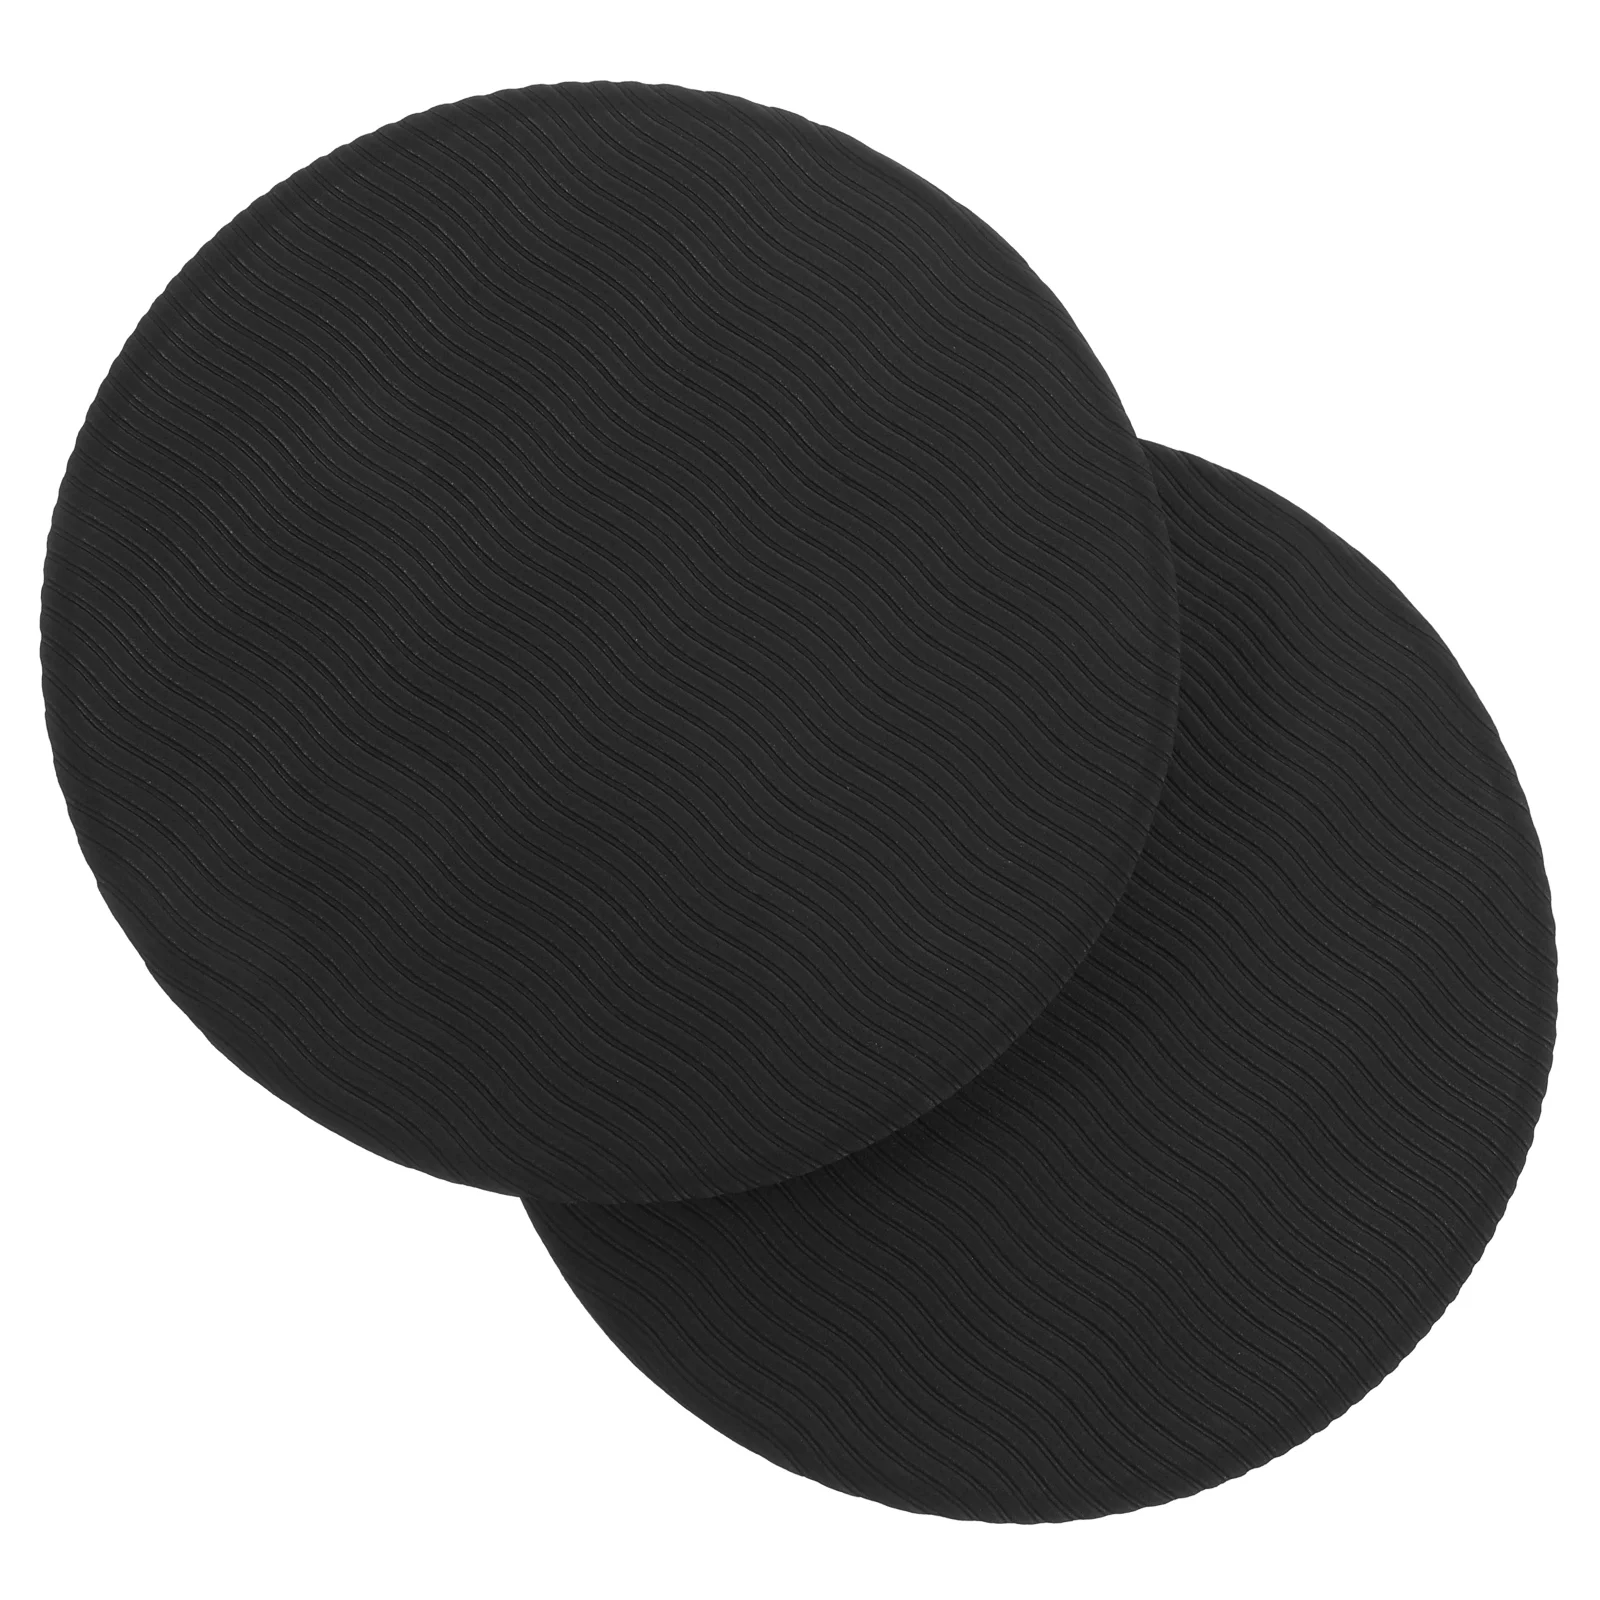 

2pcs Yoga Workout Knee Pad Cushion Thick Round Eco TPE Yoga Pad Comfort Yoga Pilates Workout Support Pad for Hands Wrists Knees